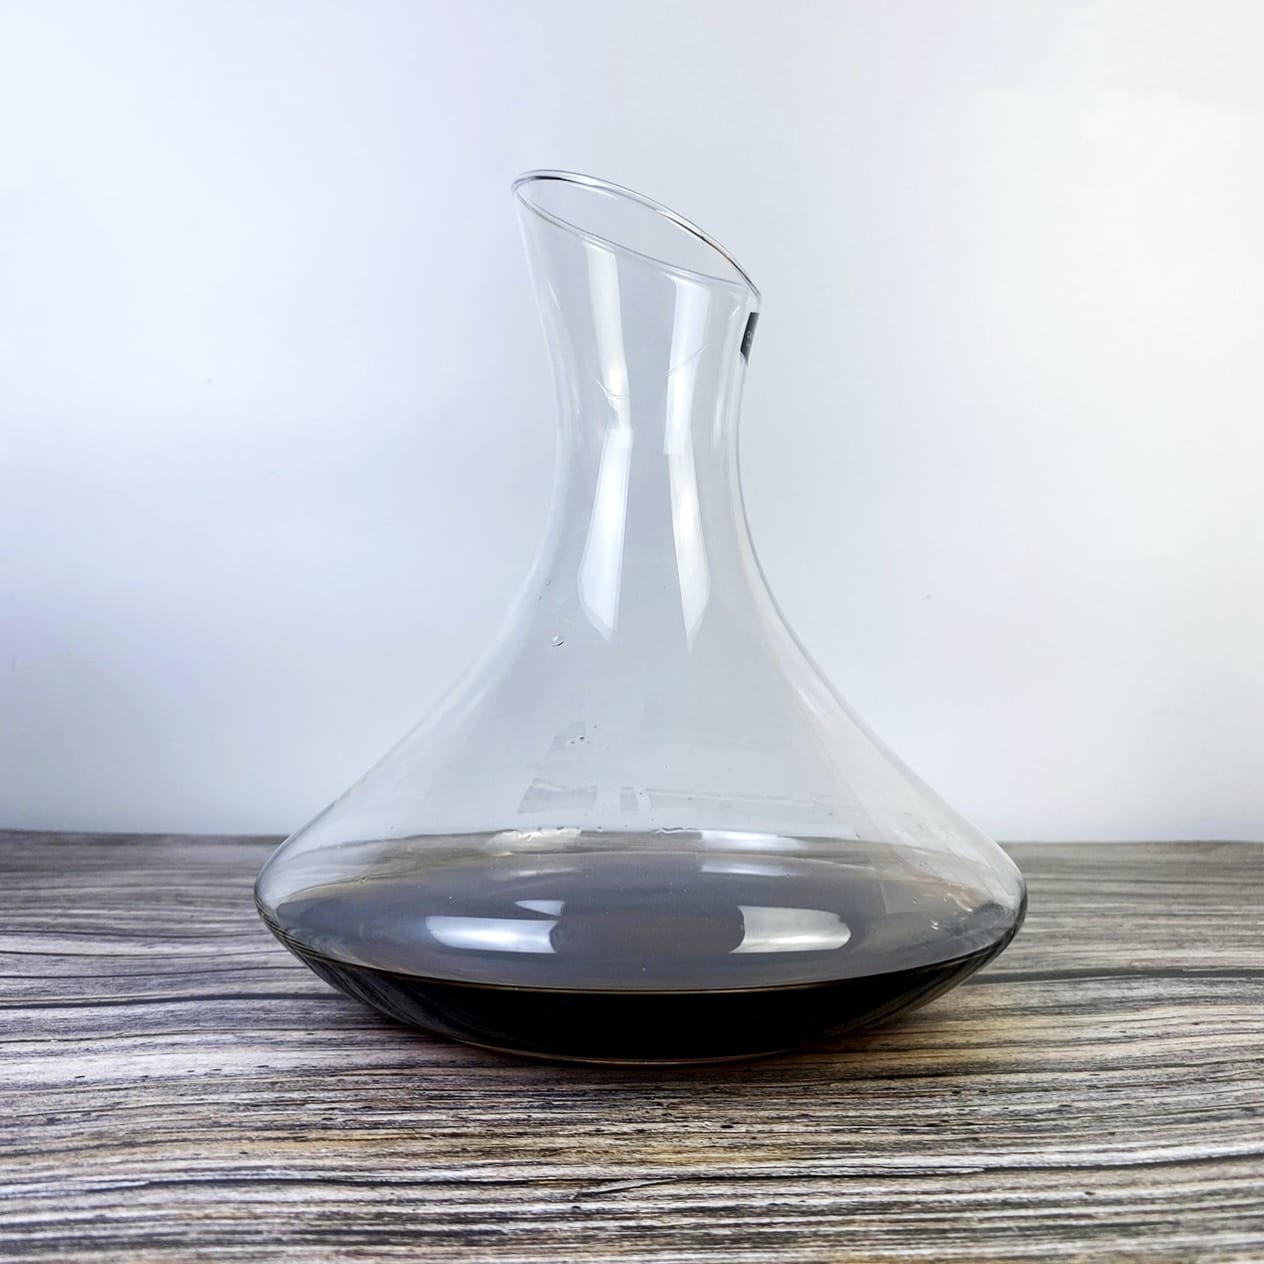 Elevate your wine experience with this 1.5 L (1500ml) decanter.